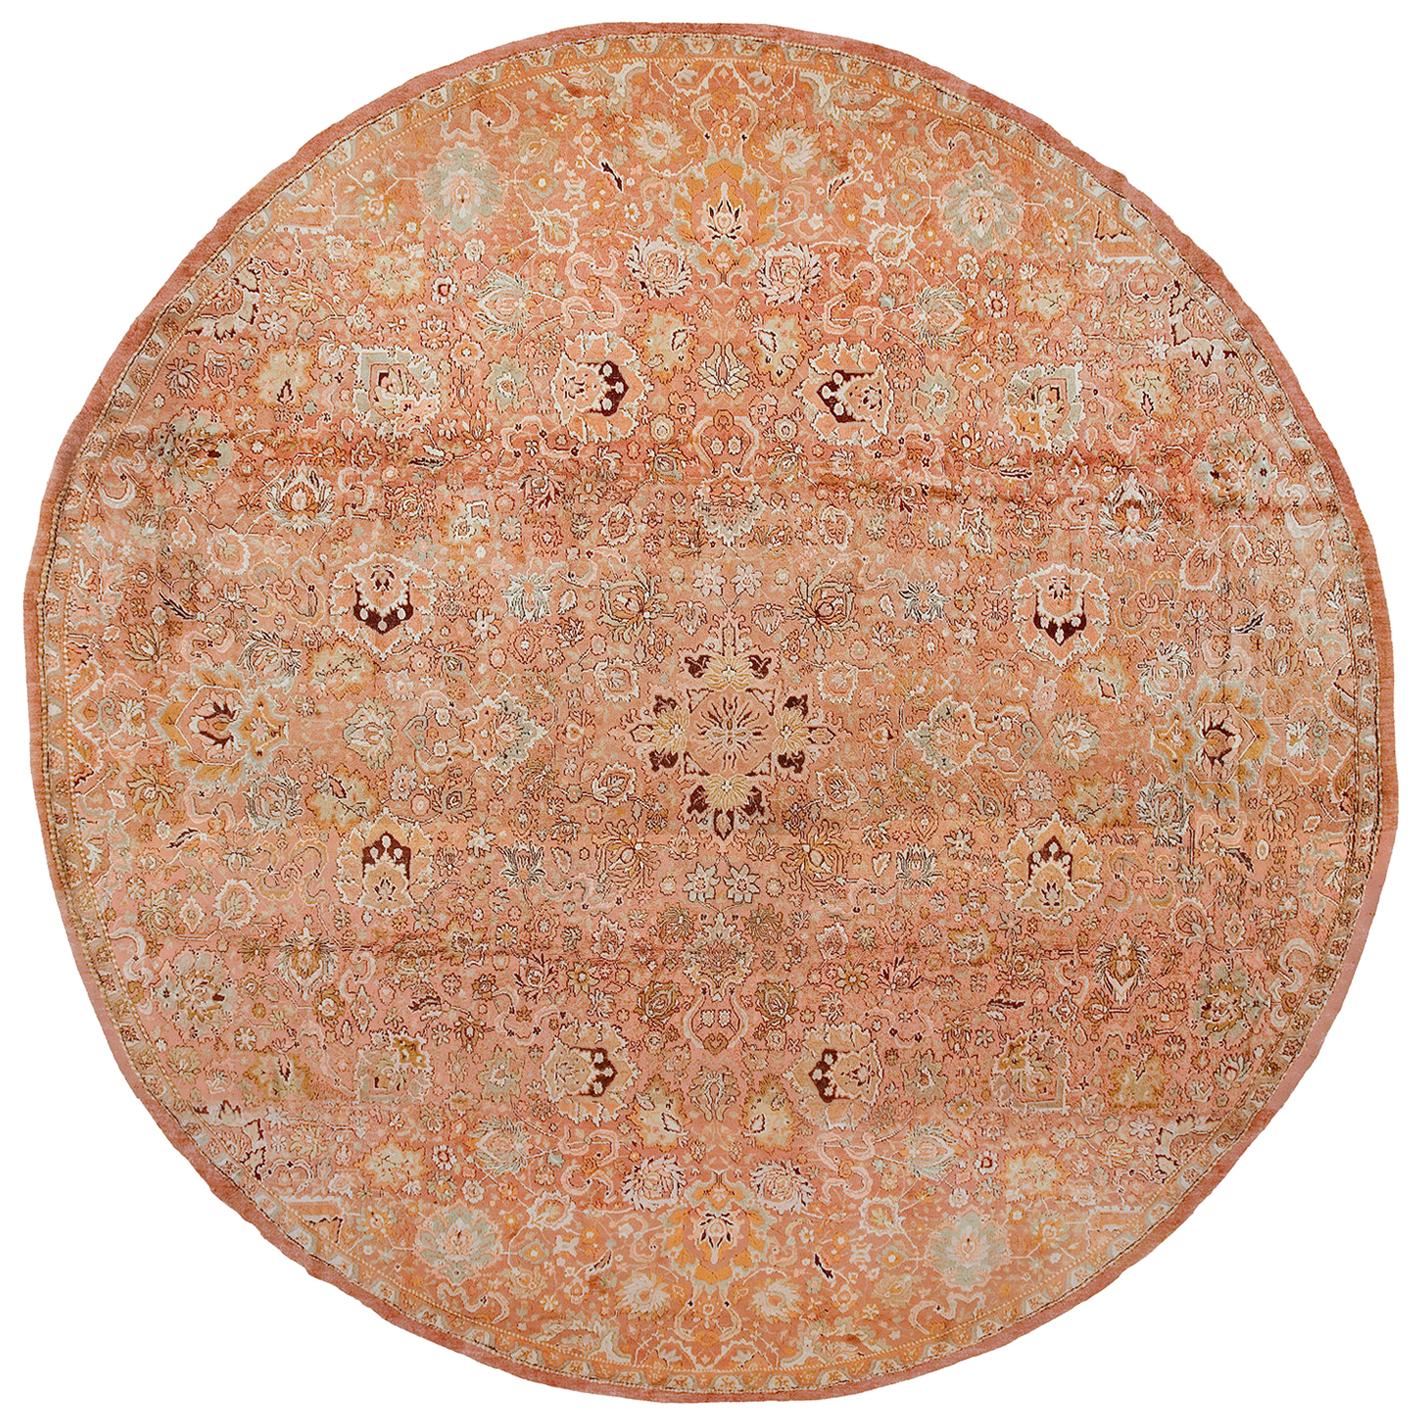 Antique Round European Axminster Rug 15' 6" x 17' 0" For Sale